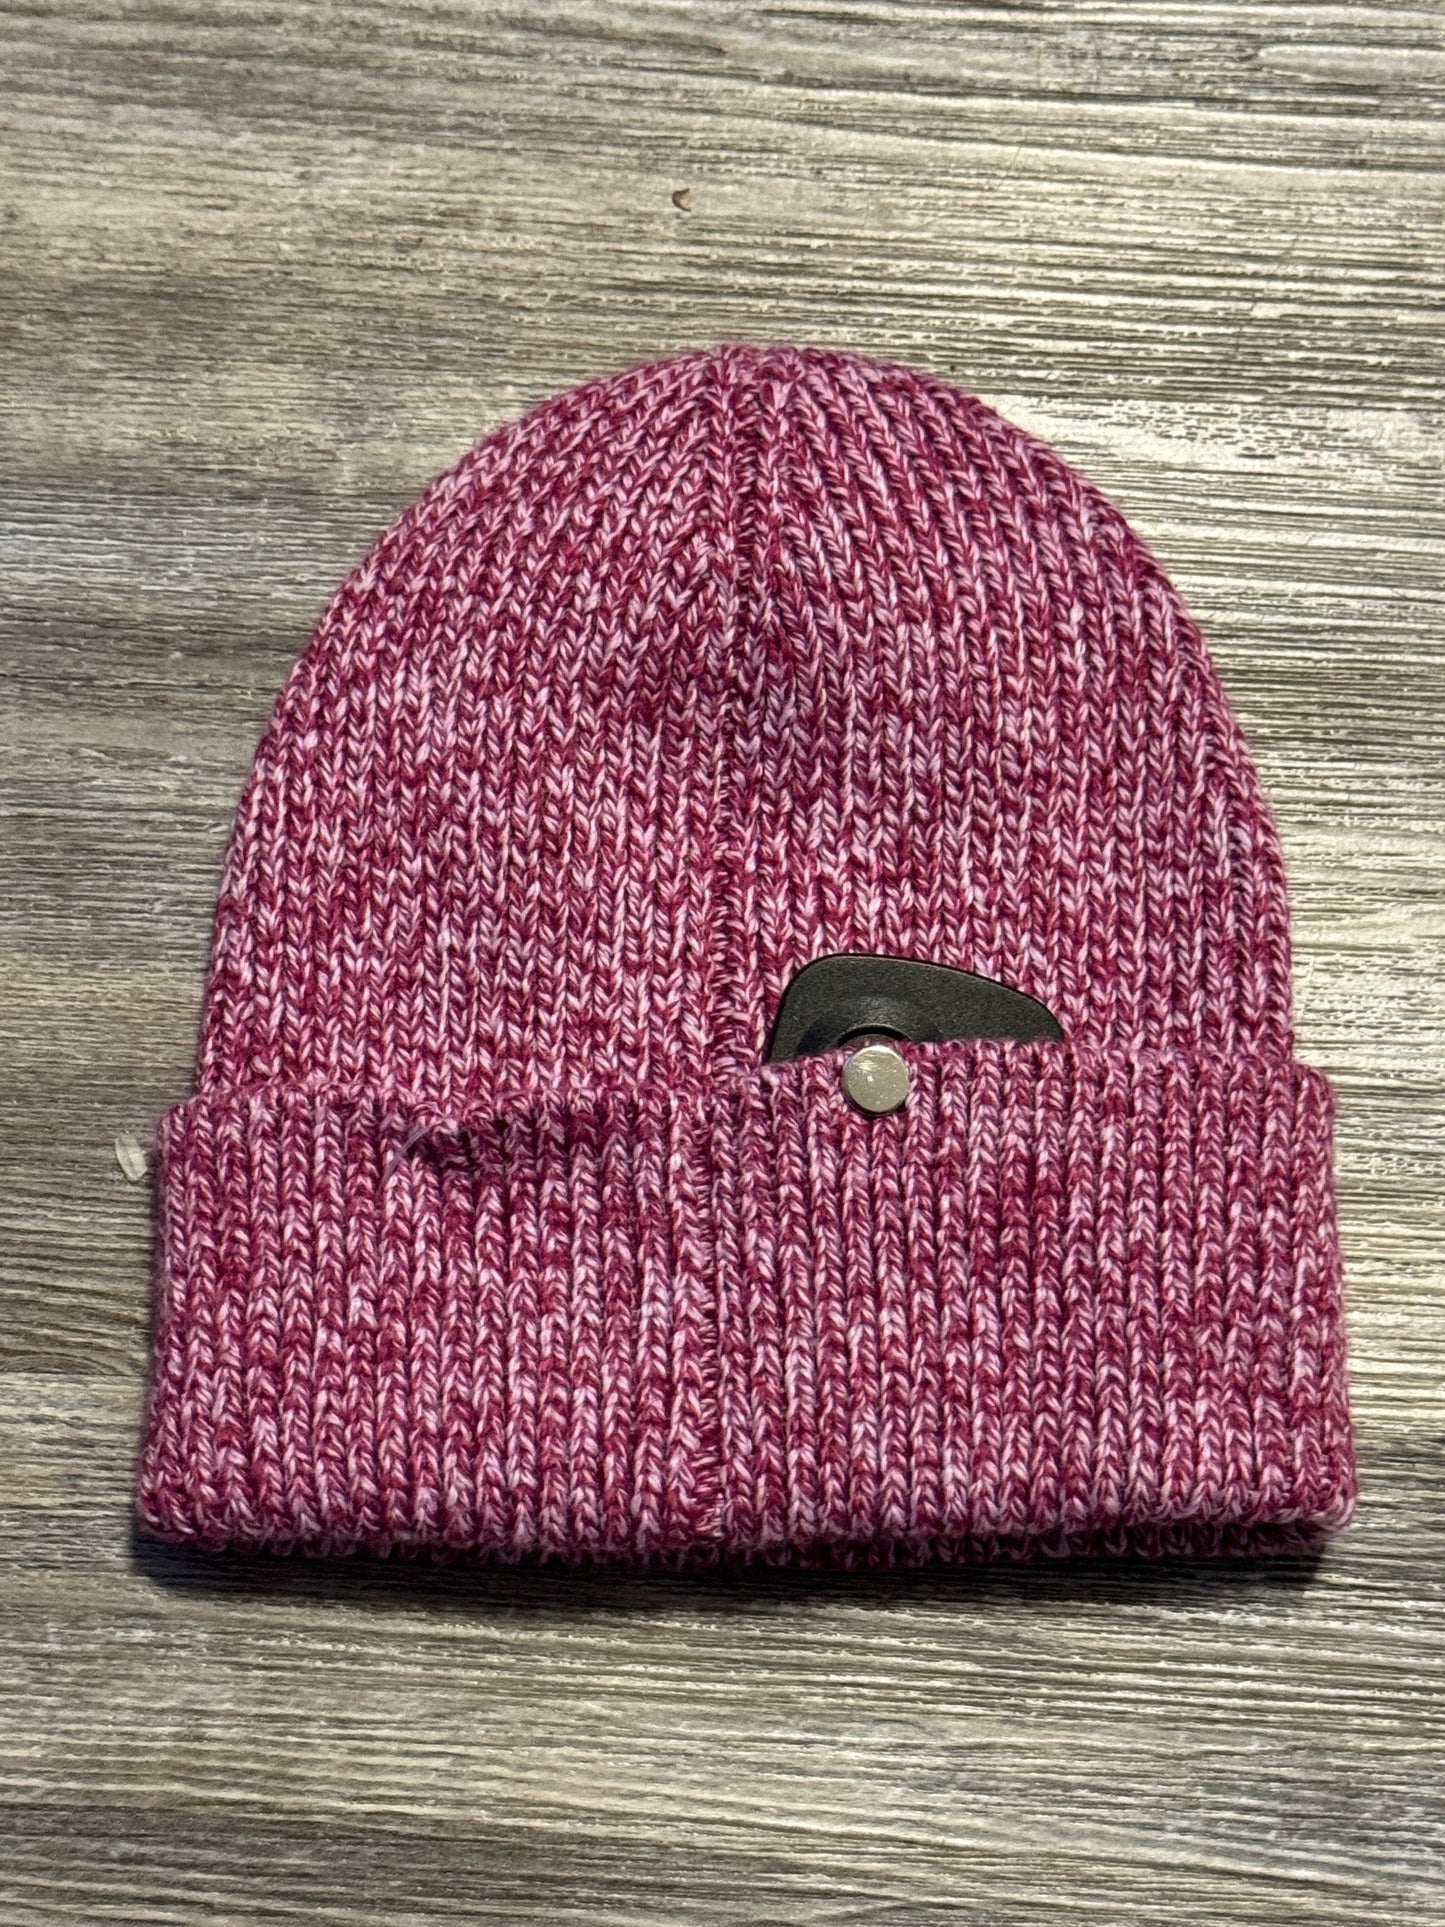 Hat Beanie By Old Navy